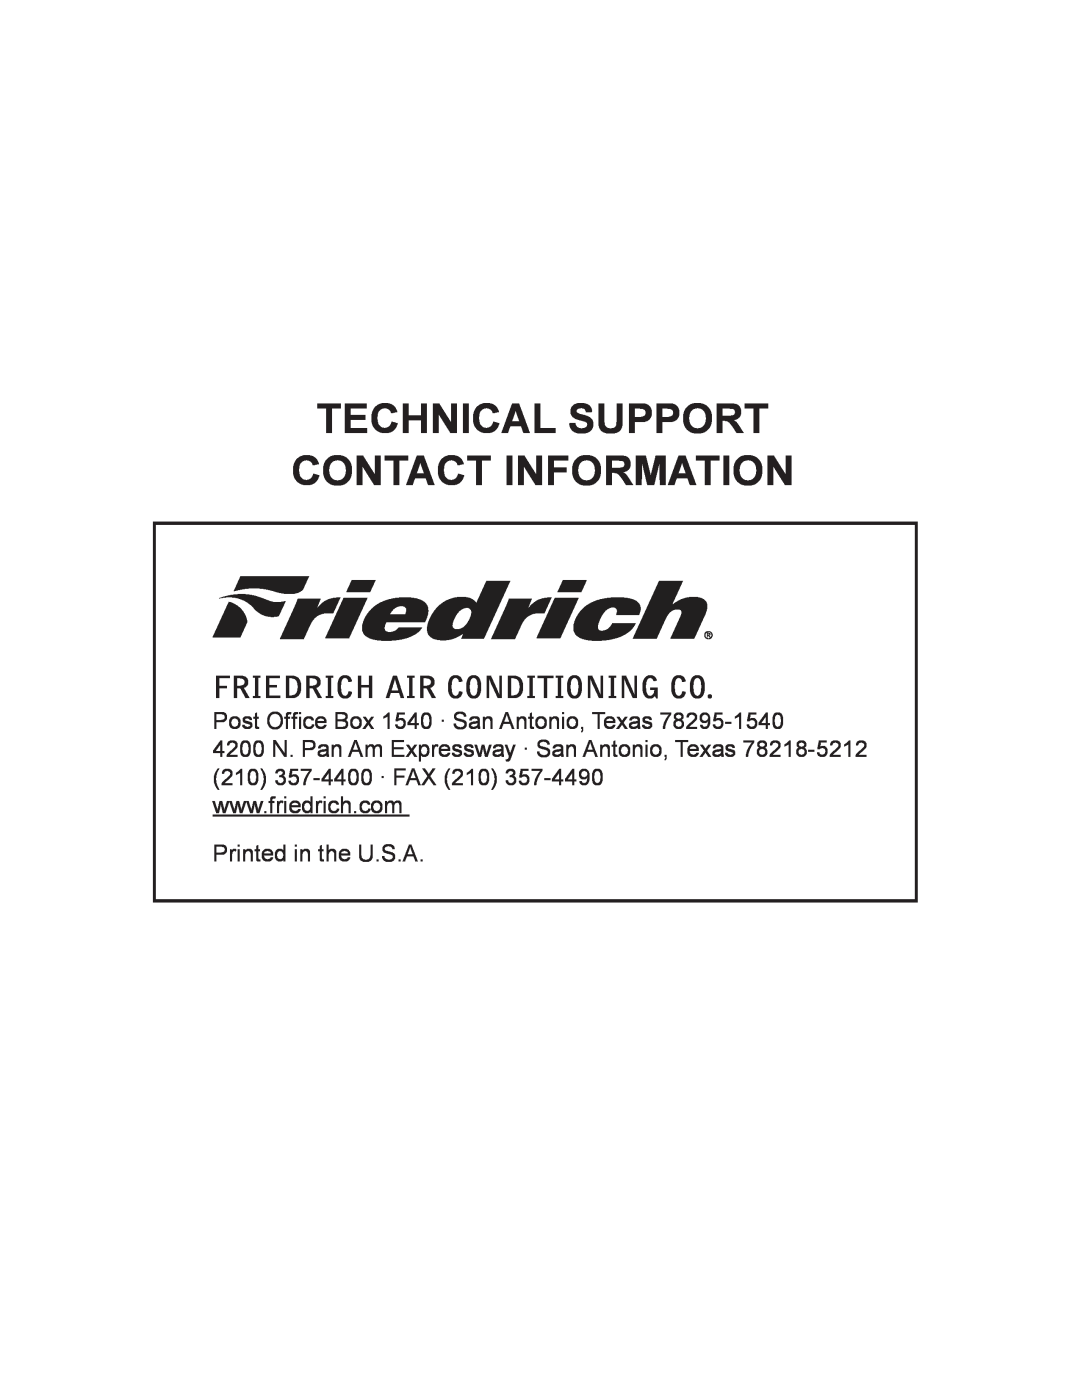 Friedrich 2008, 2009 service manual Technical Support Contact Information, Friedrich Air Conditioning Co 